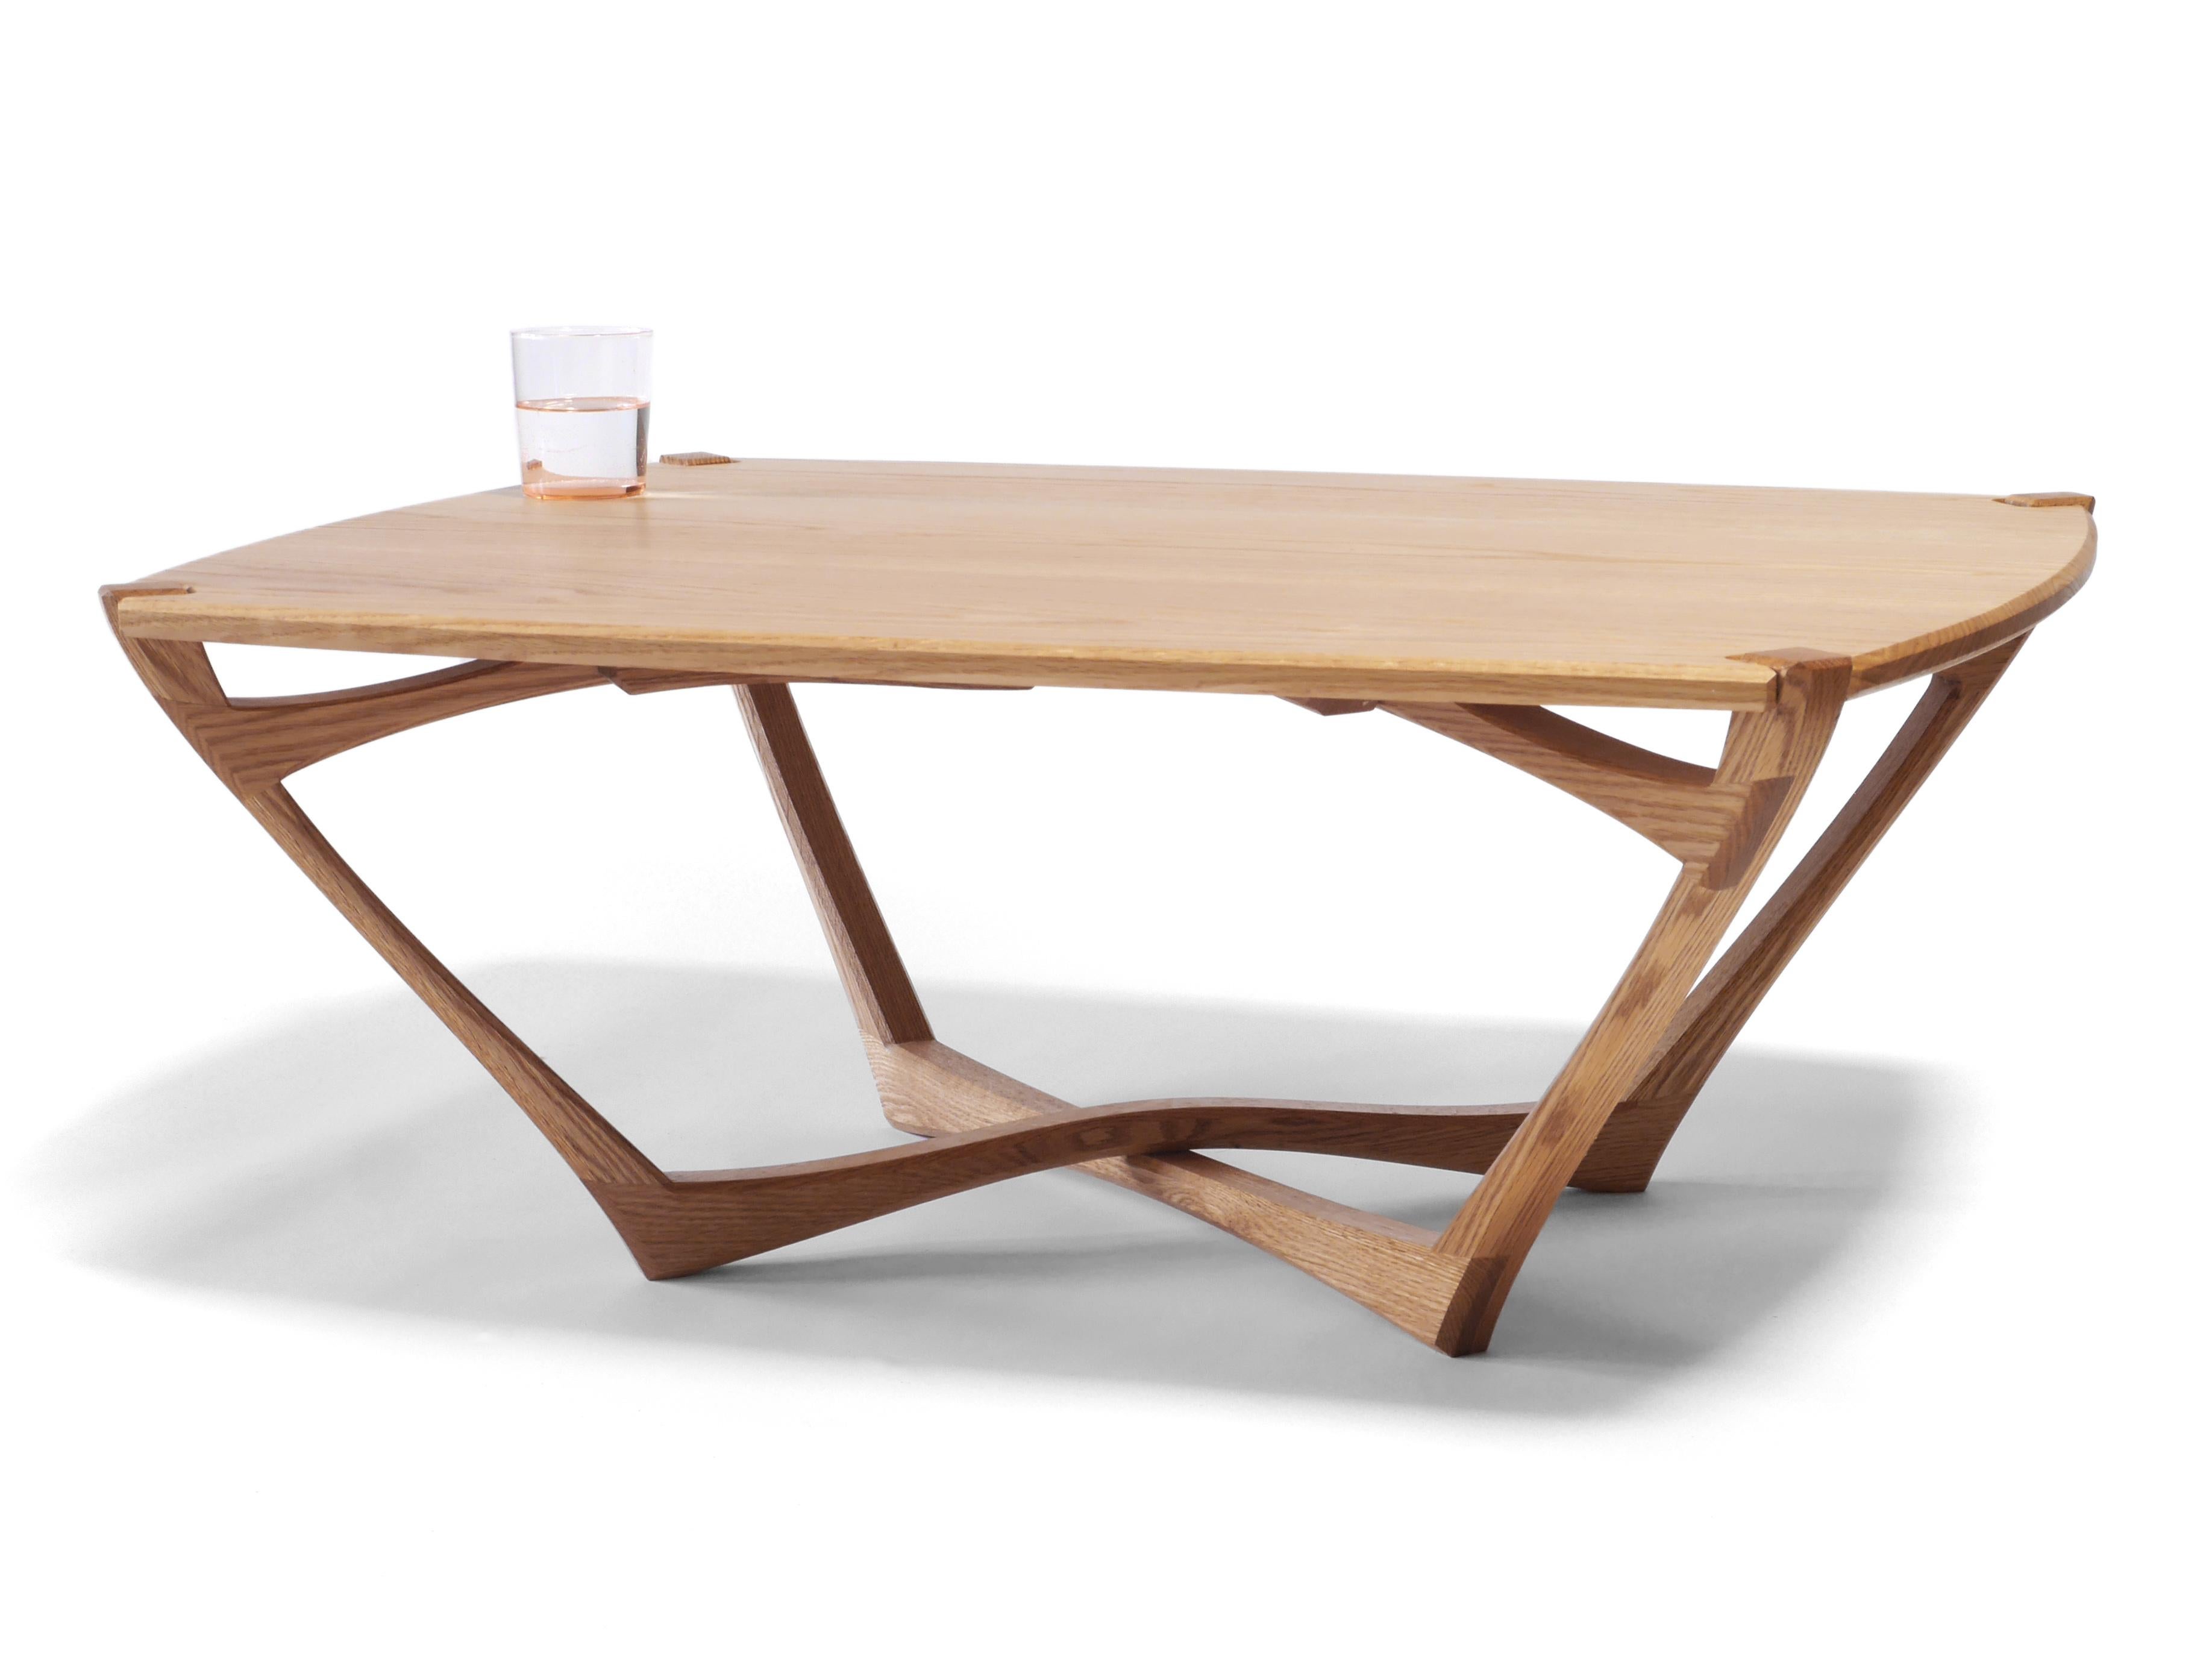 Hand-Crafted Oak Mistral Coffee Table, Modern Sculptural Living Room Table by Arid For Sale